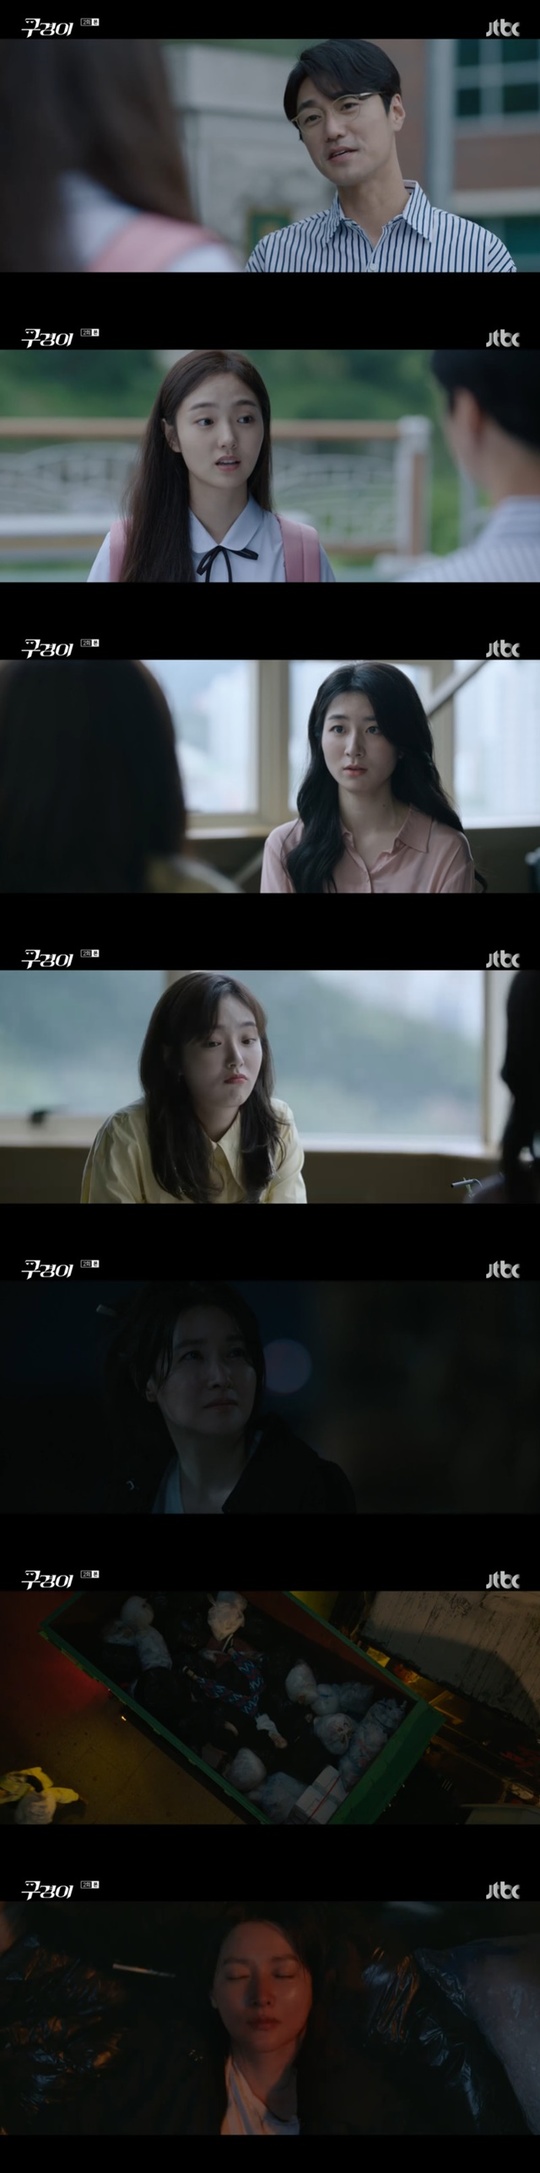 Lee Yeong-ae husband Choi Young-juns past death has been revealed.In the second episode of JTBCs Saturday Drama Gugyeongi (played by Sungchoi/directed by Lee Jung-heum), which was broadcast on October 31, K (Kim Hye-joon) asked about the death of her husband Jang Sung-Woo (Choi Young-jun) at a reunion with Lee Yeong-ae.In the past, K committed a crime of feeding antifreeze to revenge the man from Nowhere, who killed a cat he was raising at school, and met with a police officer who came to investigate it for the first time.Koo Gyeong-i was also the wife of Jang Sung-Woo, a teacher in charge of the Play department.K was not aware of Jang Sung-Woo and the police officer after transferring to the police officer The Man from Nowhere, and as an insurance investigator who set Kim Min-gyu (Kim Kang-hyun) as a witness at the scene of the accident, he was interested in the current situation of Jang Sung-Woo.Jang Sung-Woo died a few years ago.K went to the homeland lord and asked about the death of Jang Sung-Woo, and the lord said, Do you remember my senior? Did you know that he fell into a reservoir?He said he thought he had slipped and drowned, but someone had seen him and Jean. Rumors about what they were up to.I was told that Jang was a police officer and finished with a wife bag. I couldnt even carry Sams head and died.When K. asked, Is that what you really do? the lord said, I dont know. Theyre dead and theres no evidence.Theres no evidence, K said, and K. Maybe he was trying to find evidence that his husband was the killer. Wasnt that really dirty?Whoever did that should have killed him first.In the meantime, when a team member who played a game together was abused by his parents and was trying to make an extreme choice by accumulating debts to gambling addiction, he found him with Santa (Baek Sung-chul) and stopped him from dying.He said to the policeman, Ill push you away when you get close. Dont come. He tried to jump out of the building.In that situation, the caliber said, I think so. There is no reason to live. Really. Youre right. What are you doing?Im a cop, and Im a suspect. Funny enough, I still wonder if hes the real killer. If hes dead, hes dead. Im trash, right?I can get rid of anything like me. 